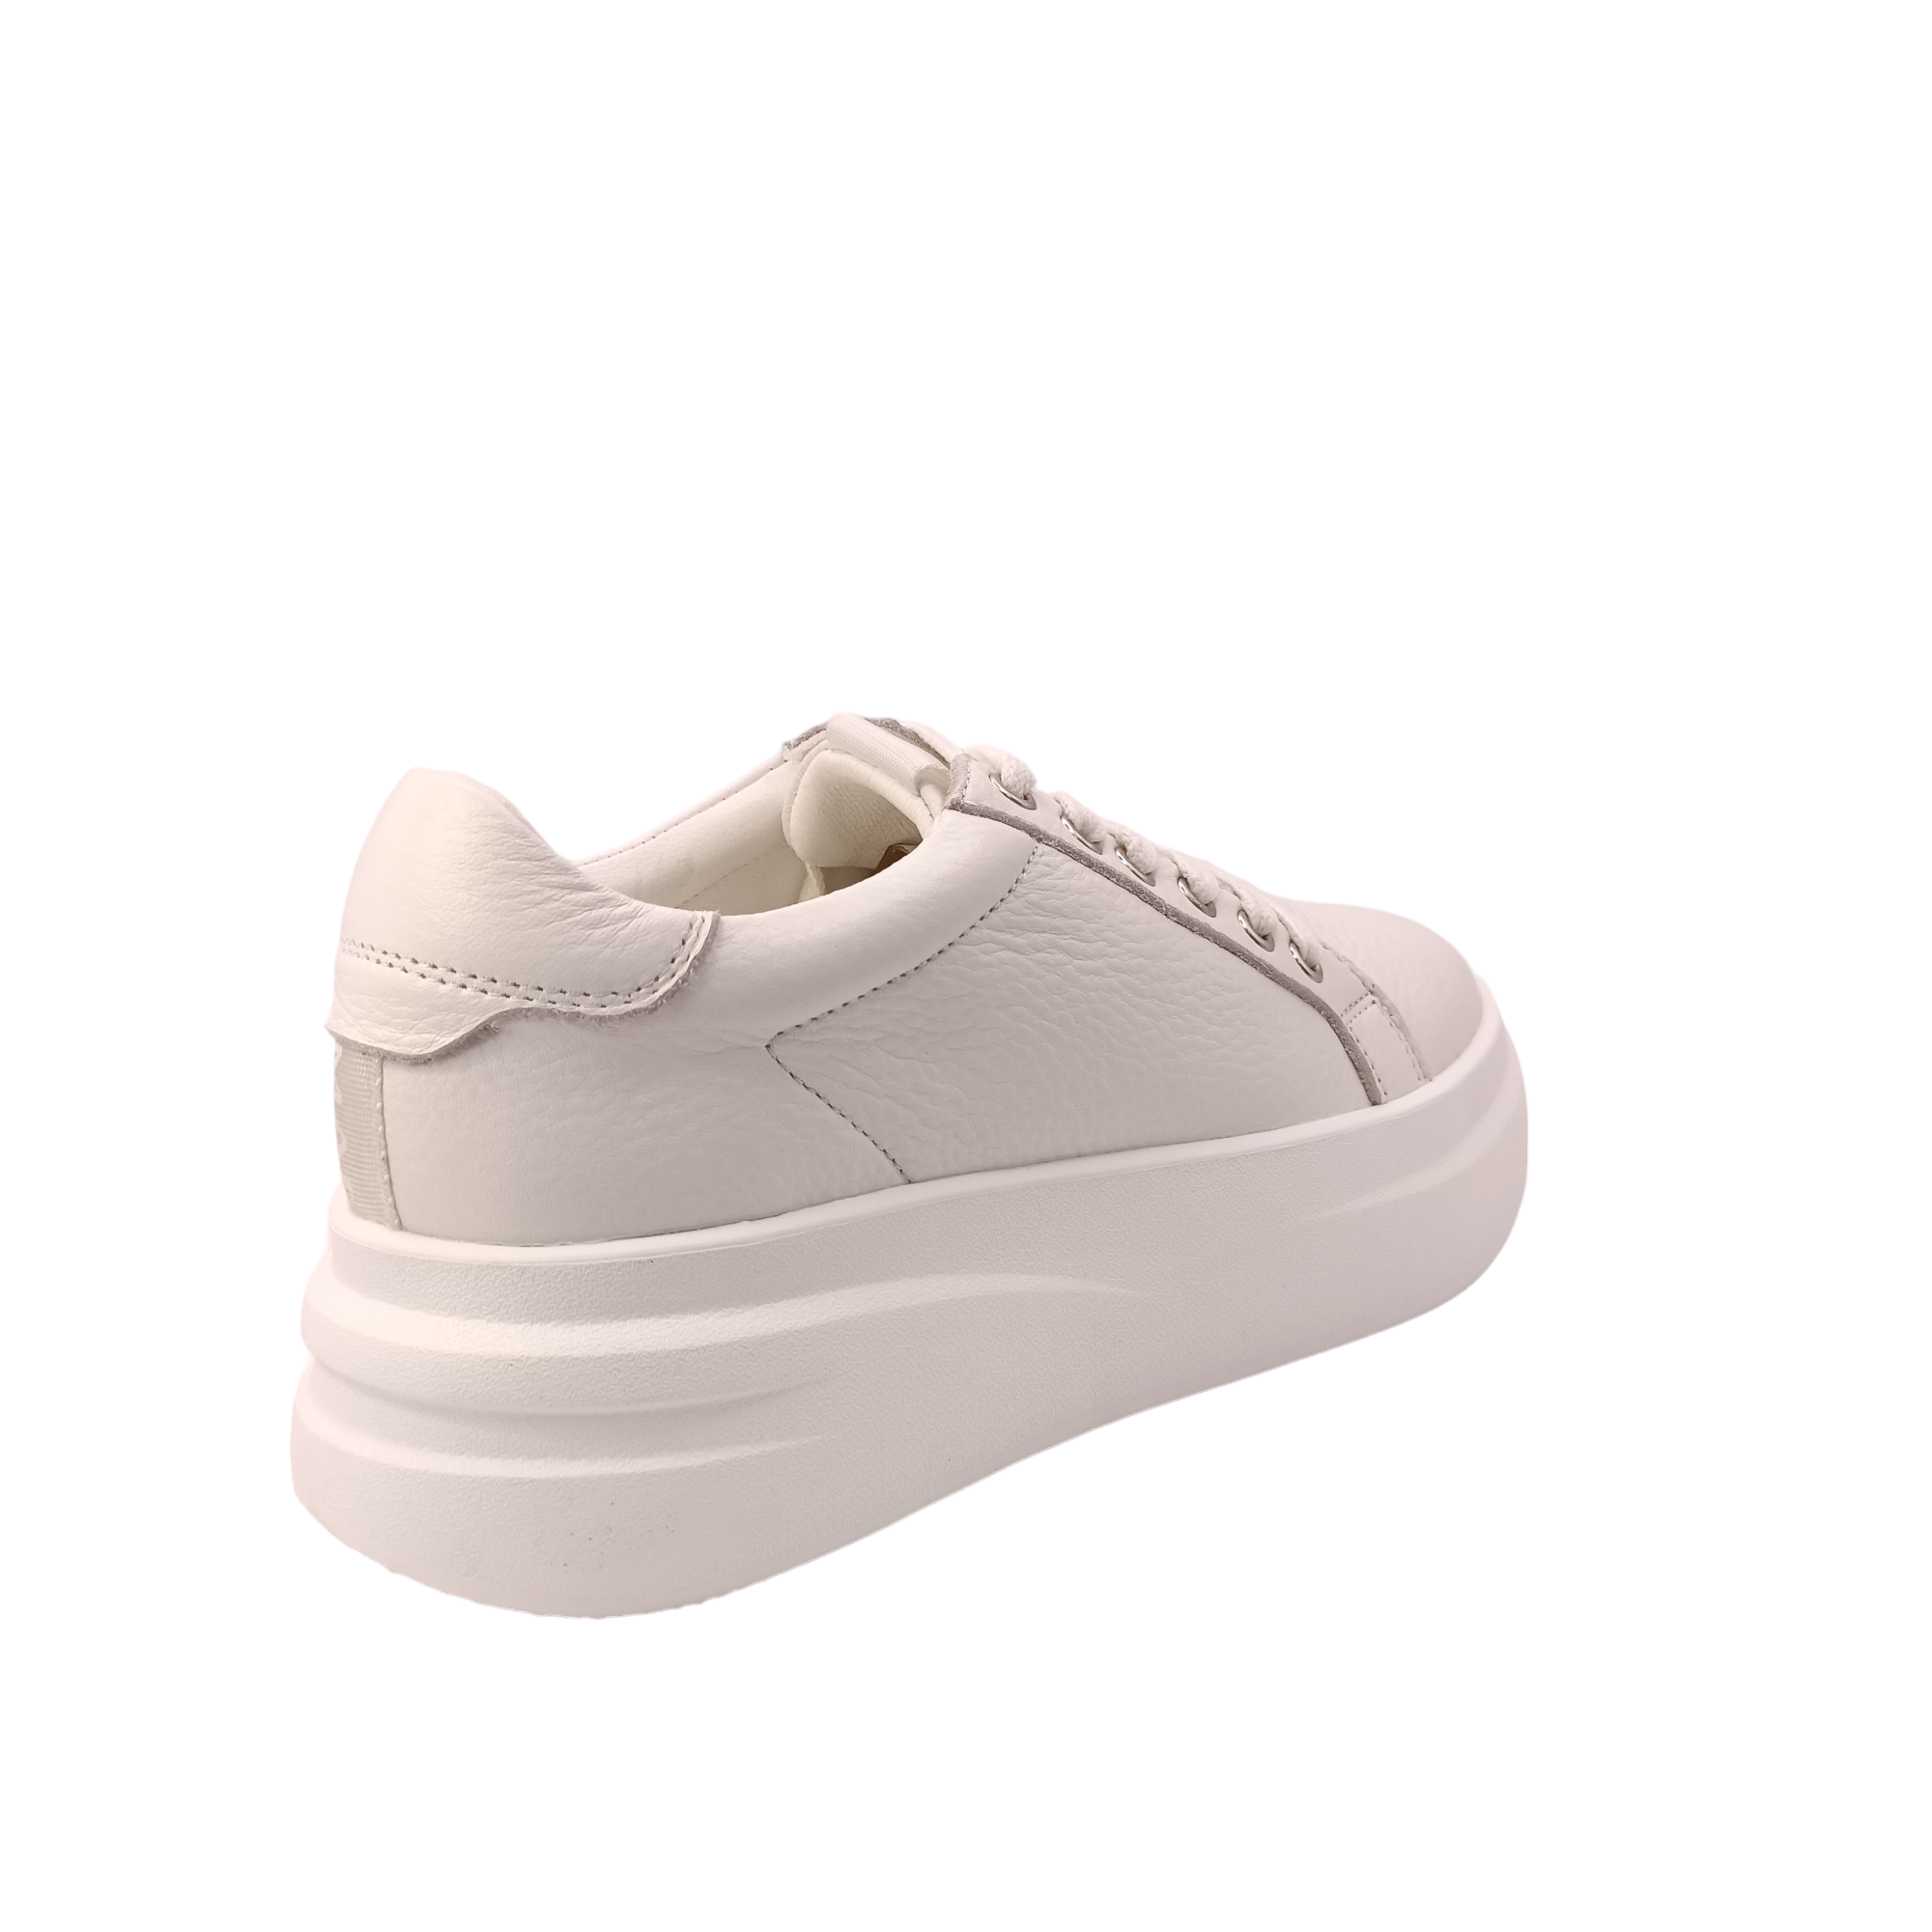 Shop Bailey Tamara London - with shoe&me - from Tamara - General - Sneaker, Winter, Womens - [collection]